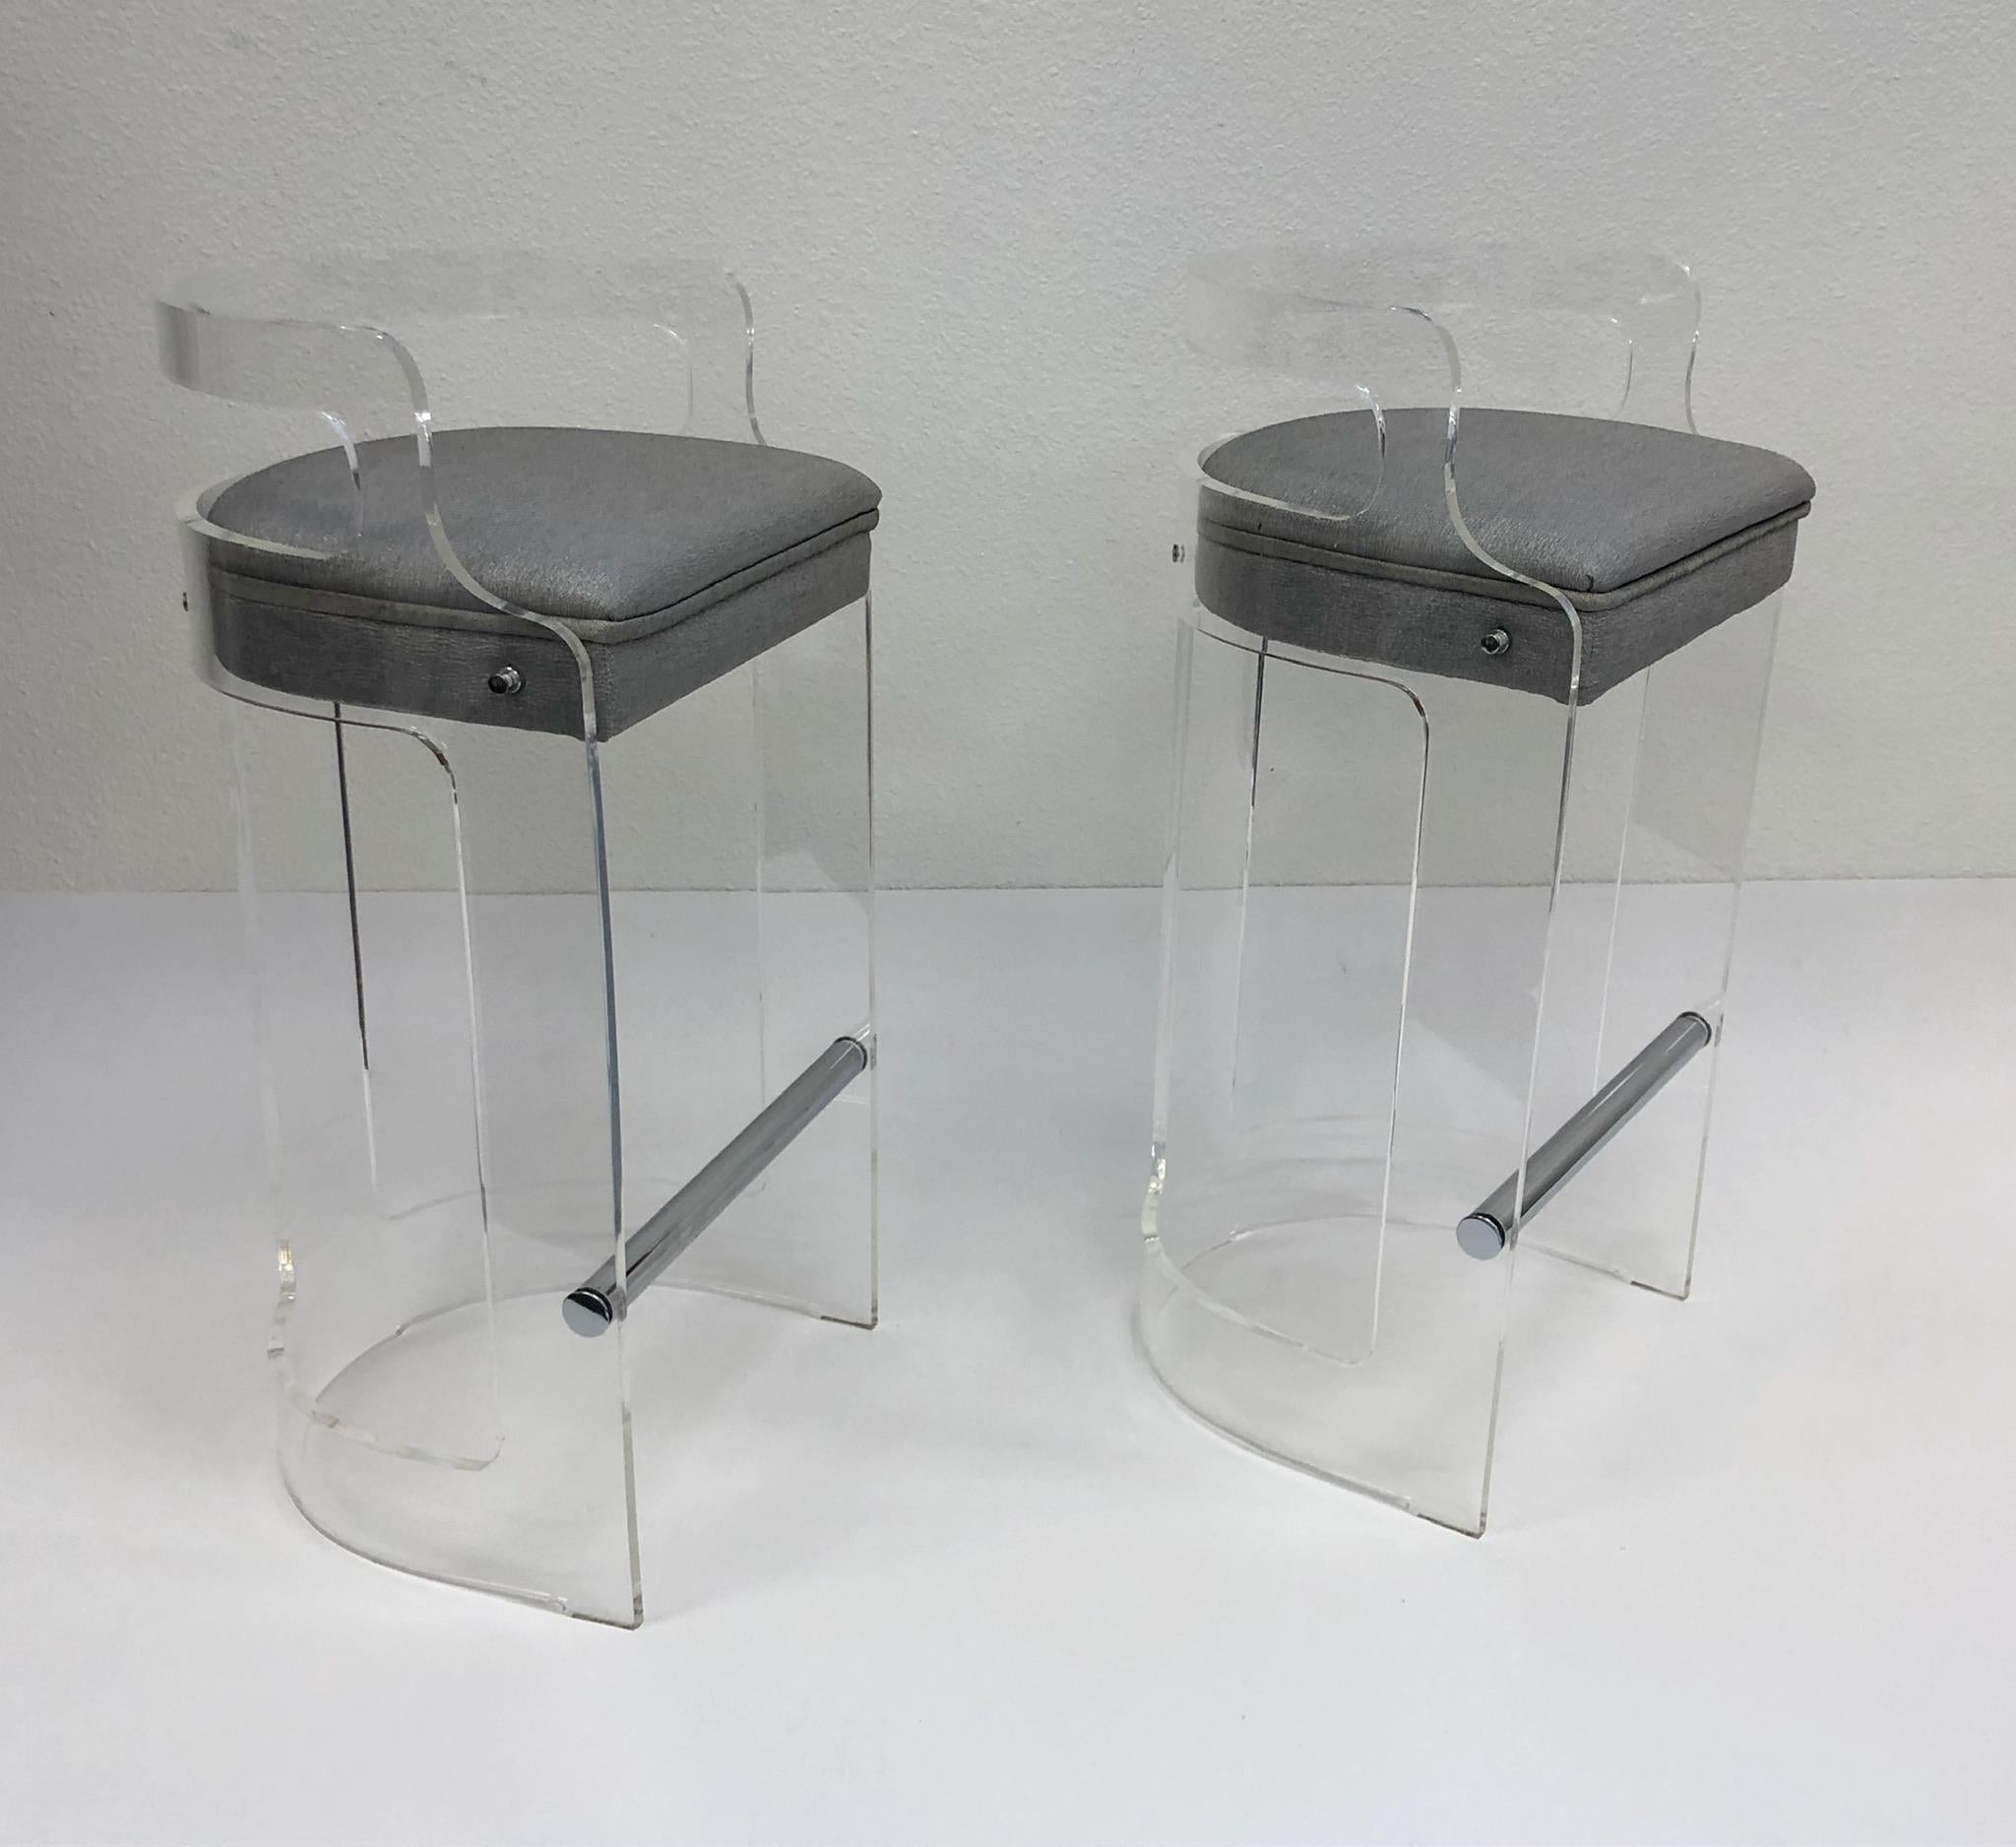 A glamorous pair of clear acrylic and polish chrome barstools design in the 1980s by Hill Manufacturing Co. The seat is covered in light grey with some metallic threads. 

Dimensions: 34” high, 29” seat, 18” wide, 16” deep.